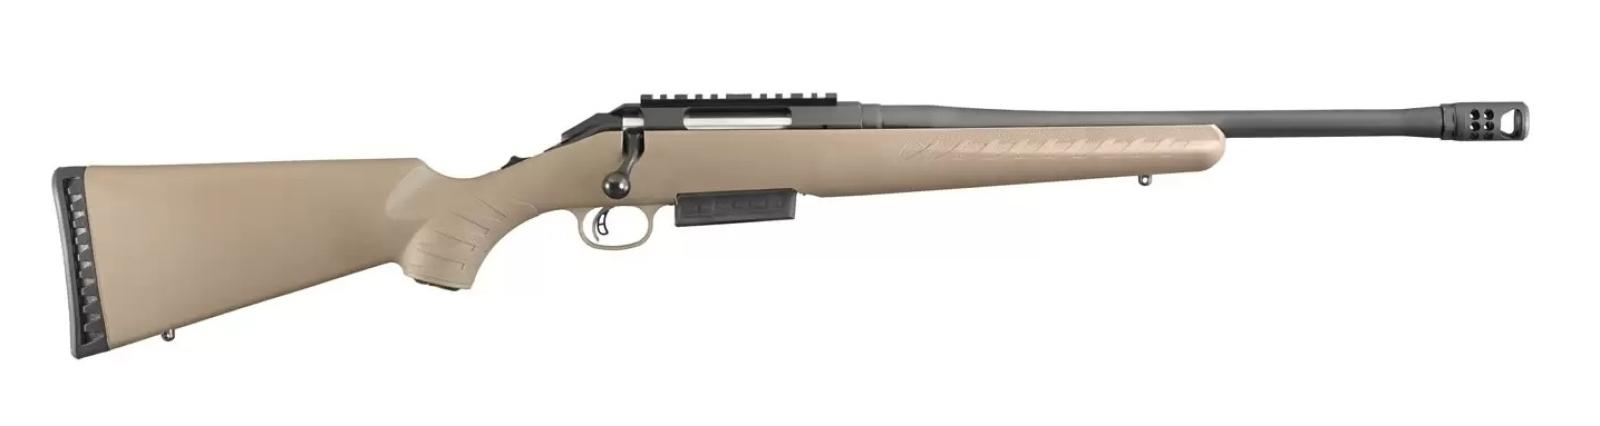 Ruger American Rifle Ranch 7.62-39mm Bolt Action Rifle